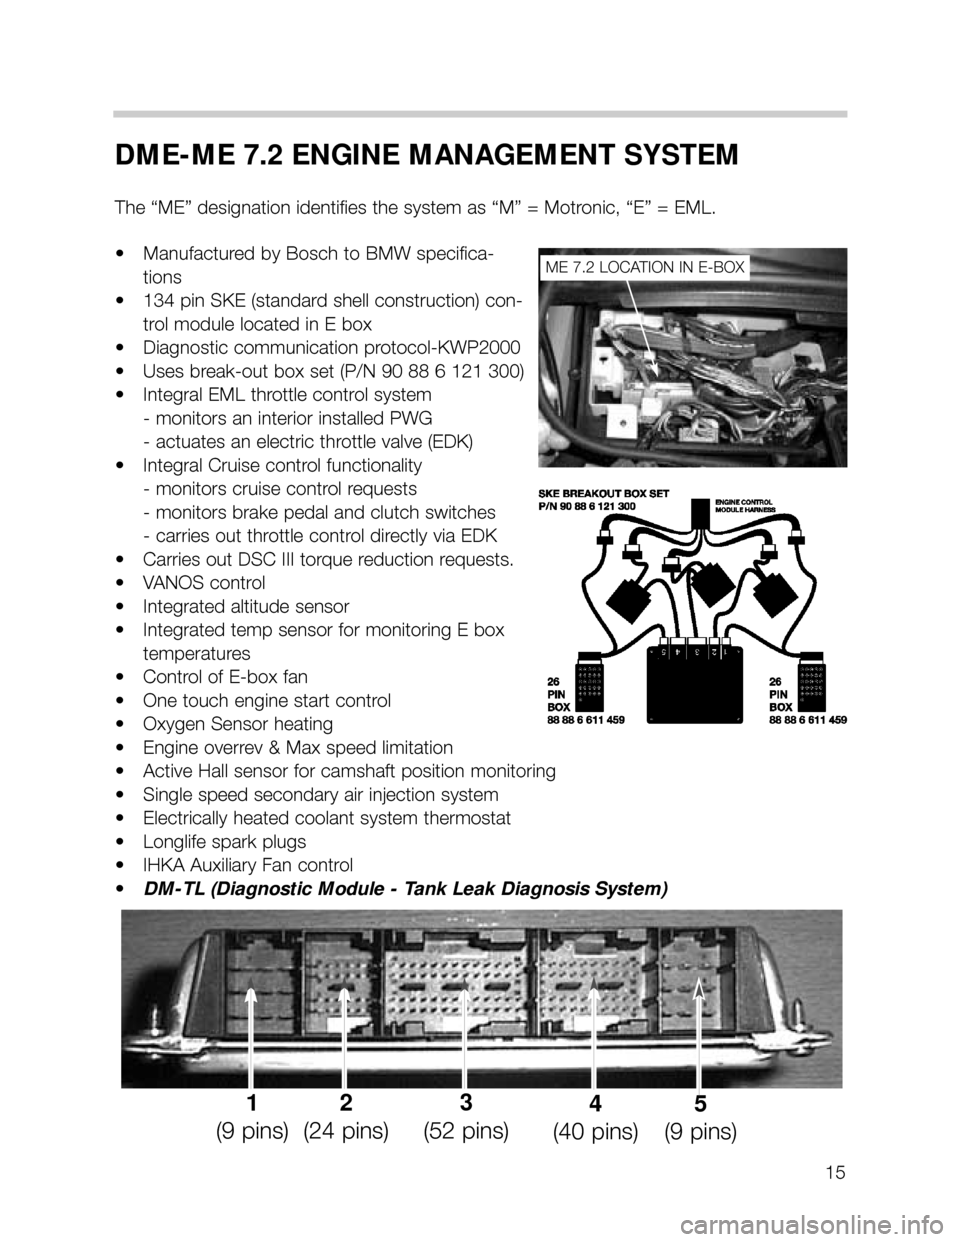 BMW X5 2006 E53 M62TU Engine User Guide 15
DME-ME 7.2 ENGINE MANAGEMENT SYSTEM
The “ME” designation identifies the system as “M” = Motronic, “E” = EML.
• Manufactured by Bosch to BMW specifica-
tions
• 134 pin SKE (standard 